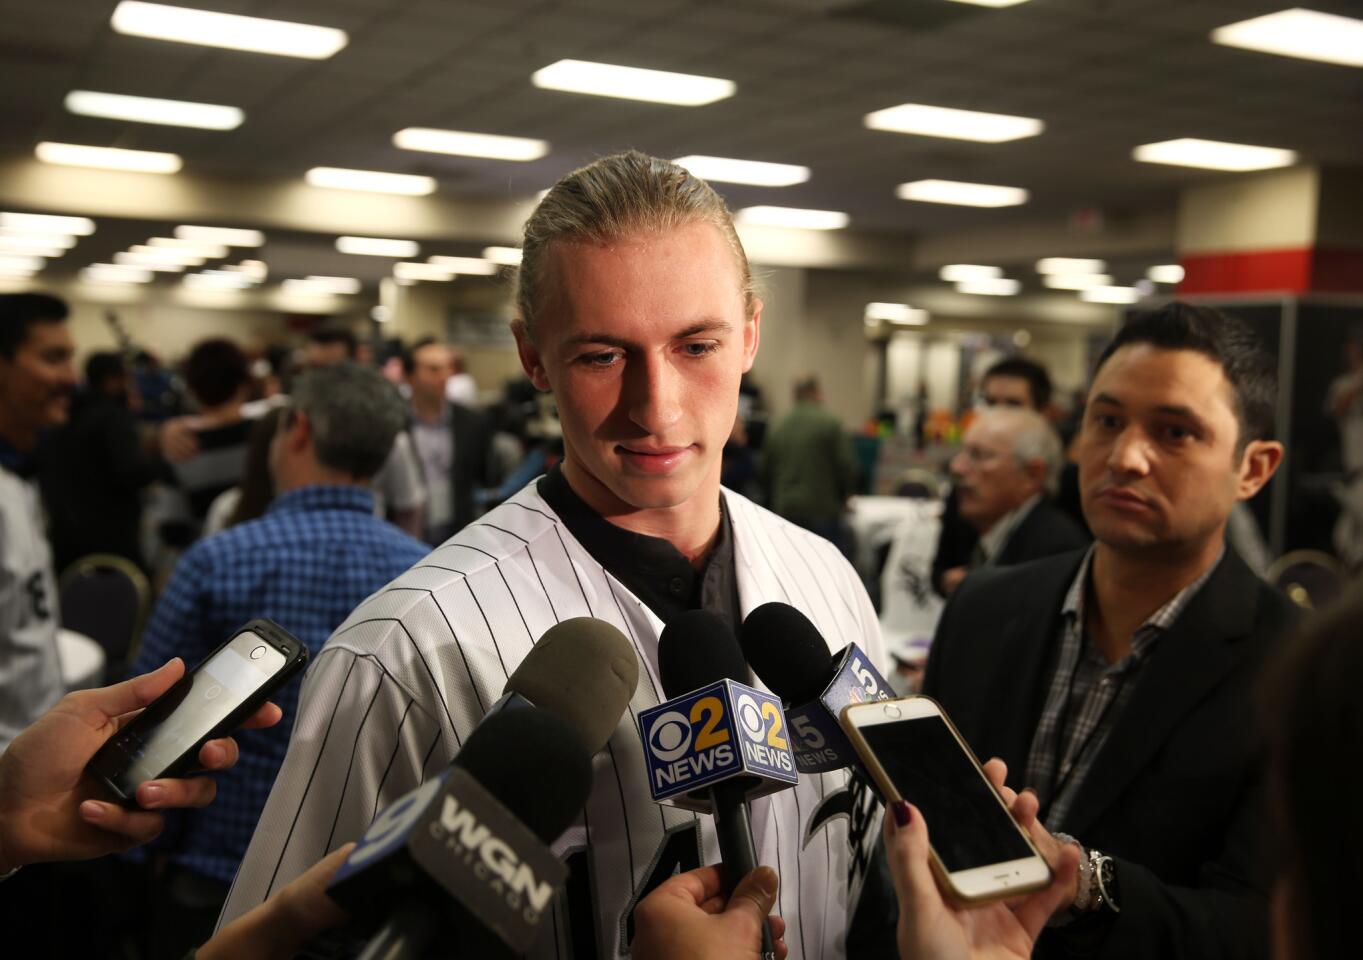 Michael Kopech talks to the media at SoxFest at the Hilton in Chicago on Jan. 27, 2017.